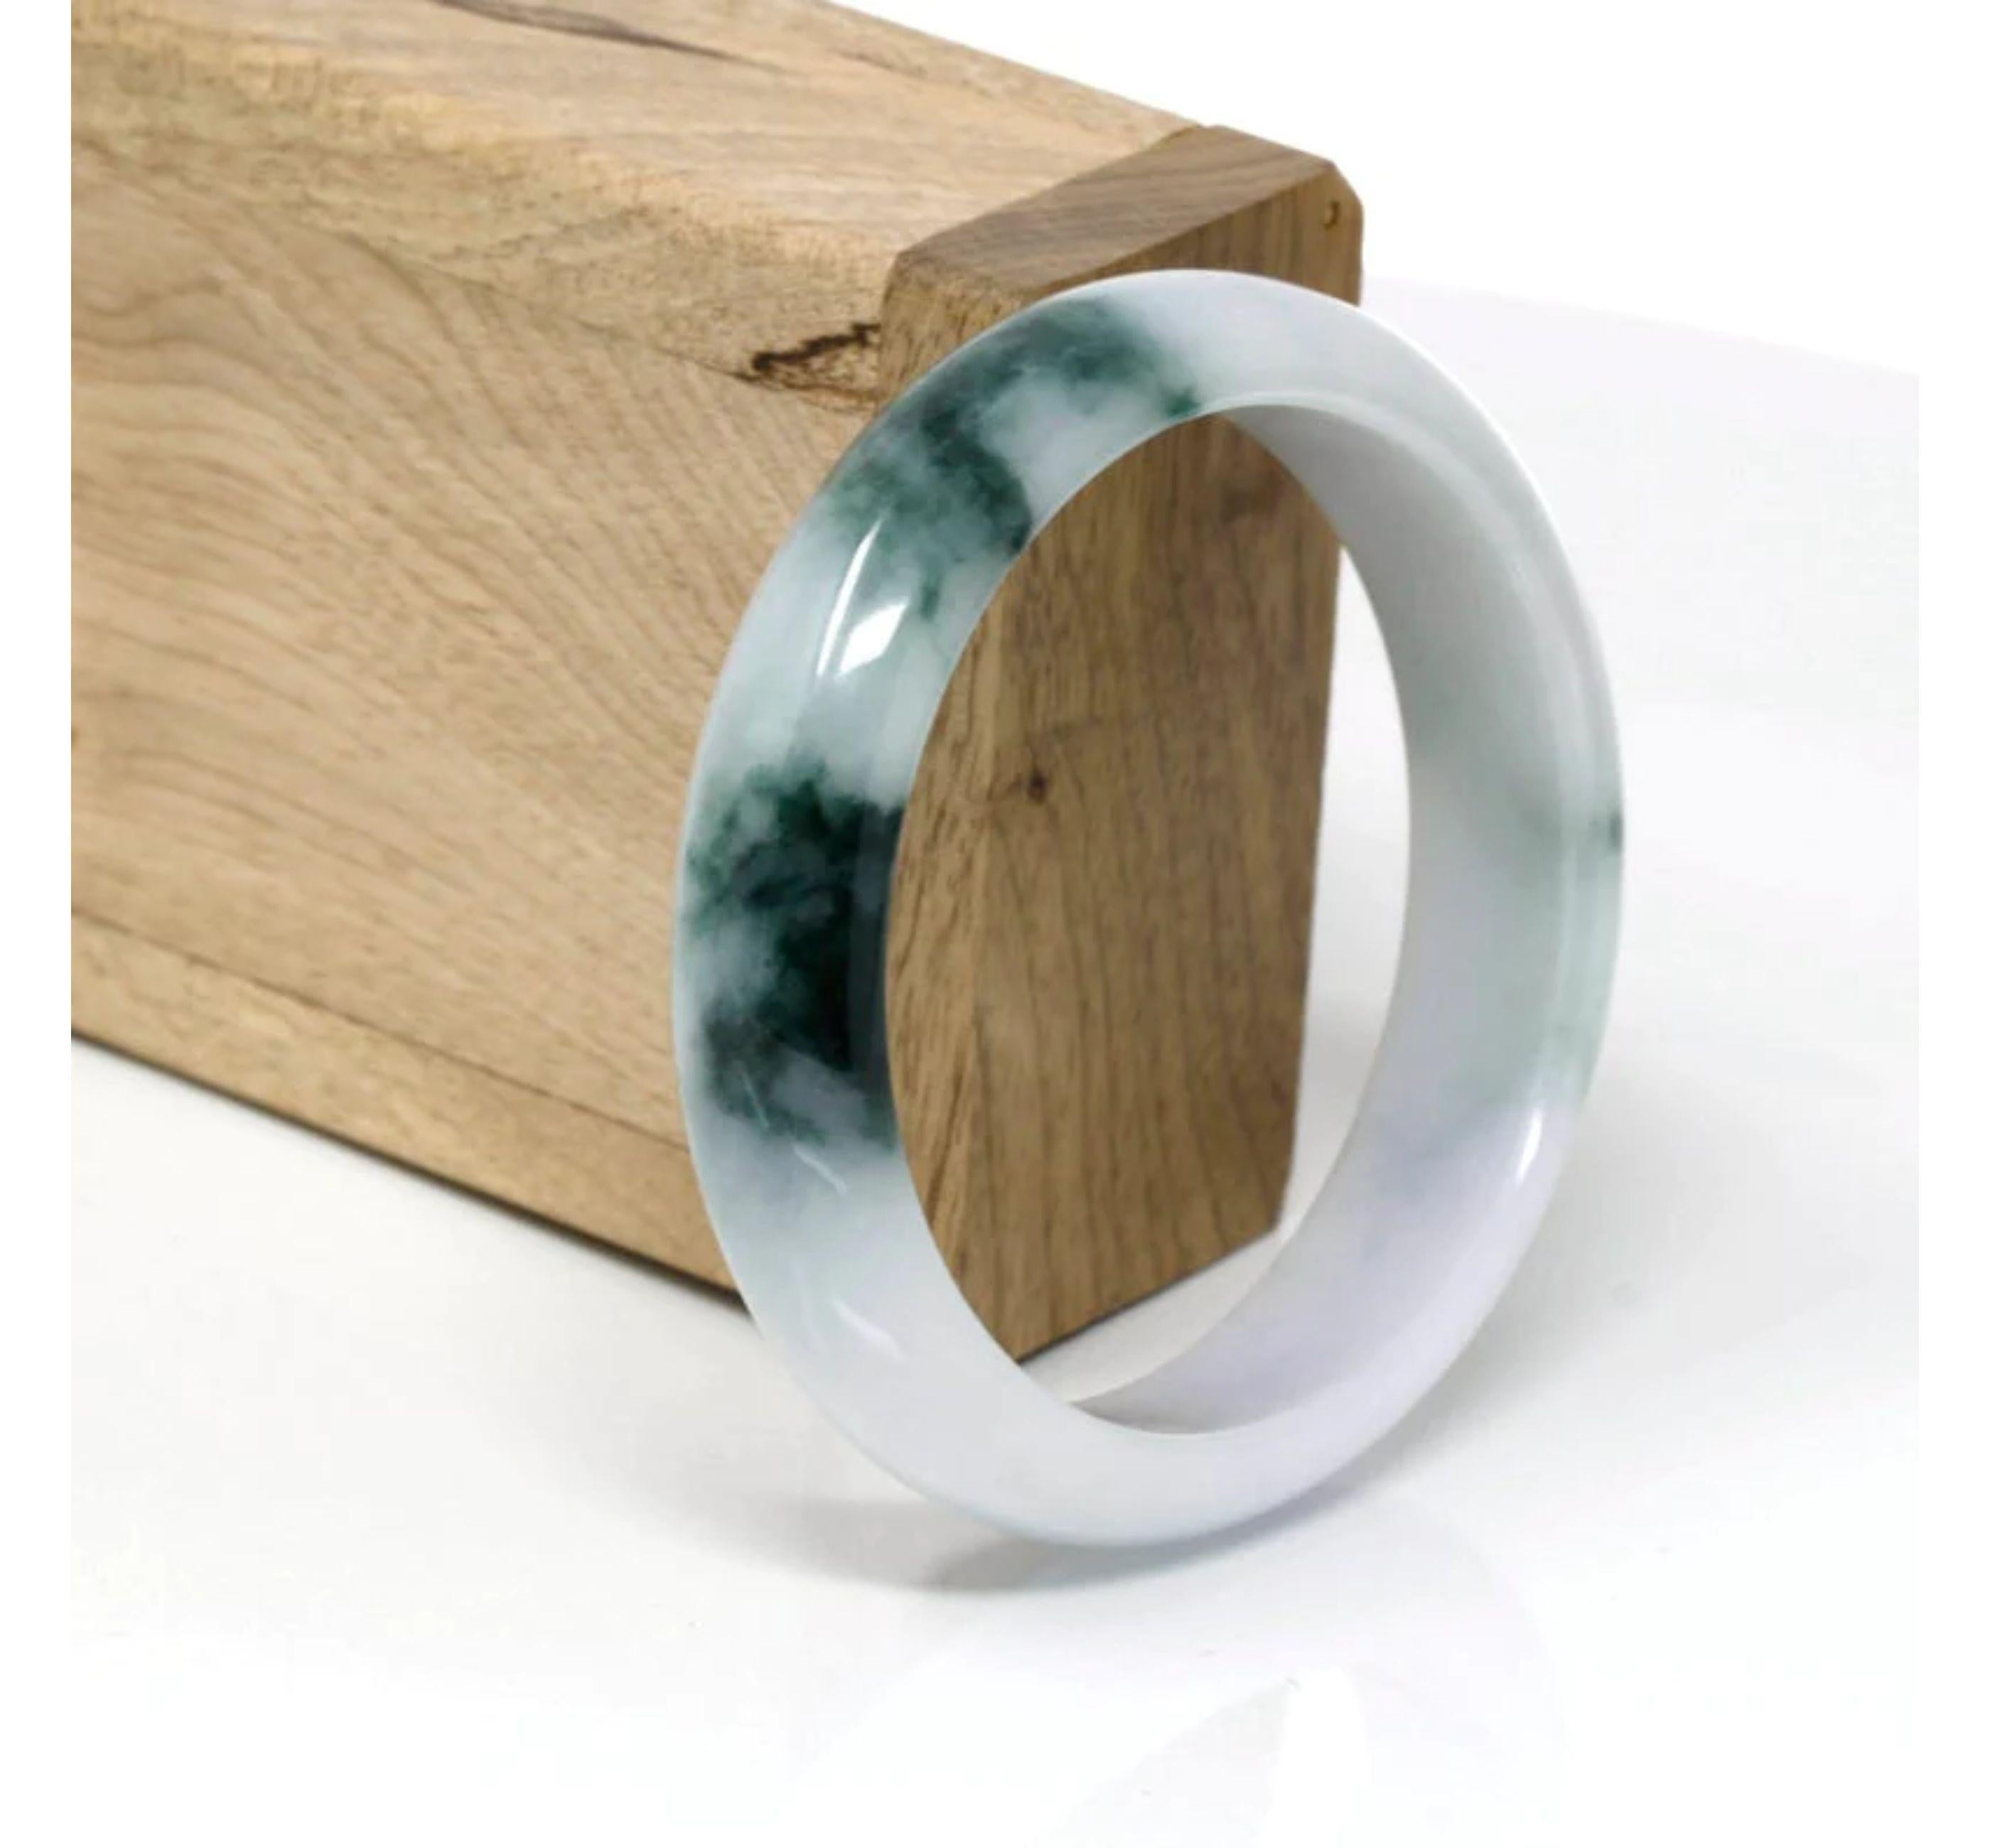 * DETAIL--- Genuine Burmese Jadeite Jade Bangle Bracelet. This bangle is made with high-quality genuine Burmese Jadeite jade, The jade texture is translucent with a little blue-green color inside. This whole bangle is lovely natural blue-green color